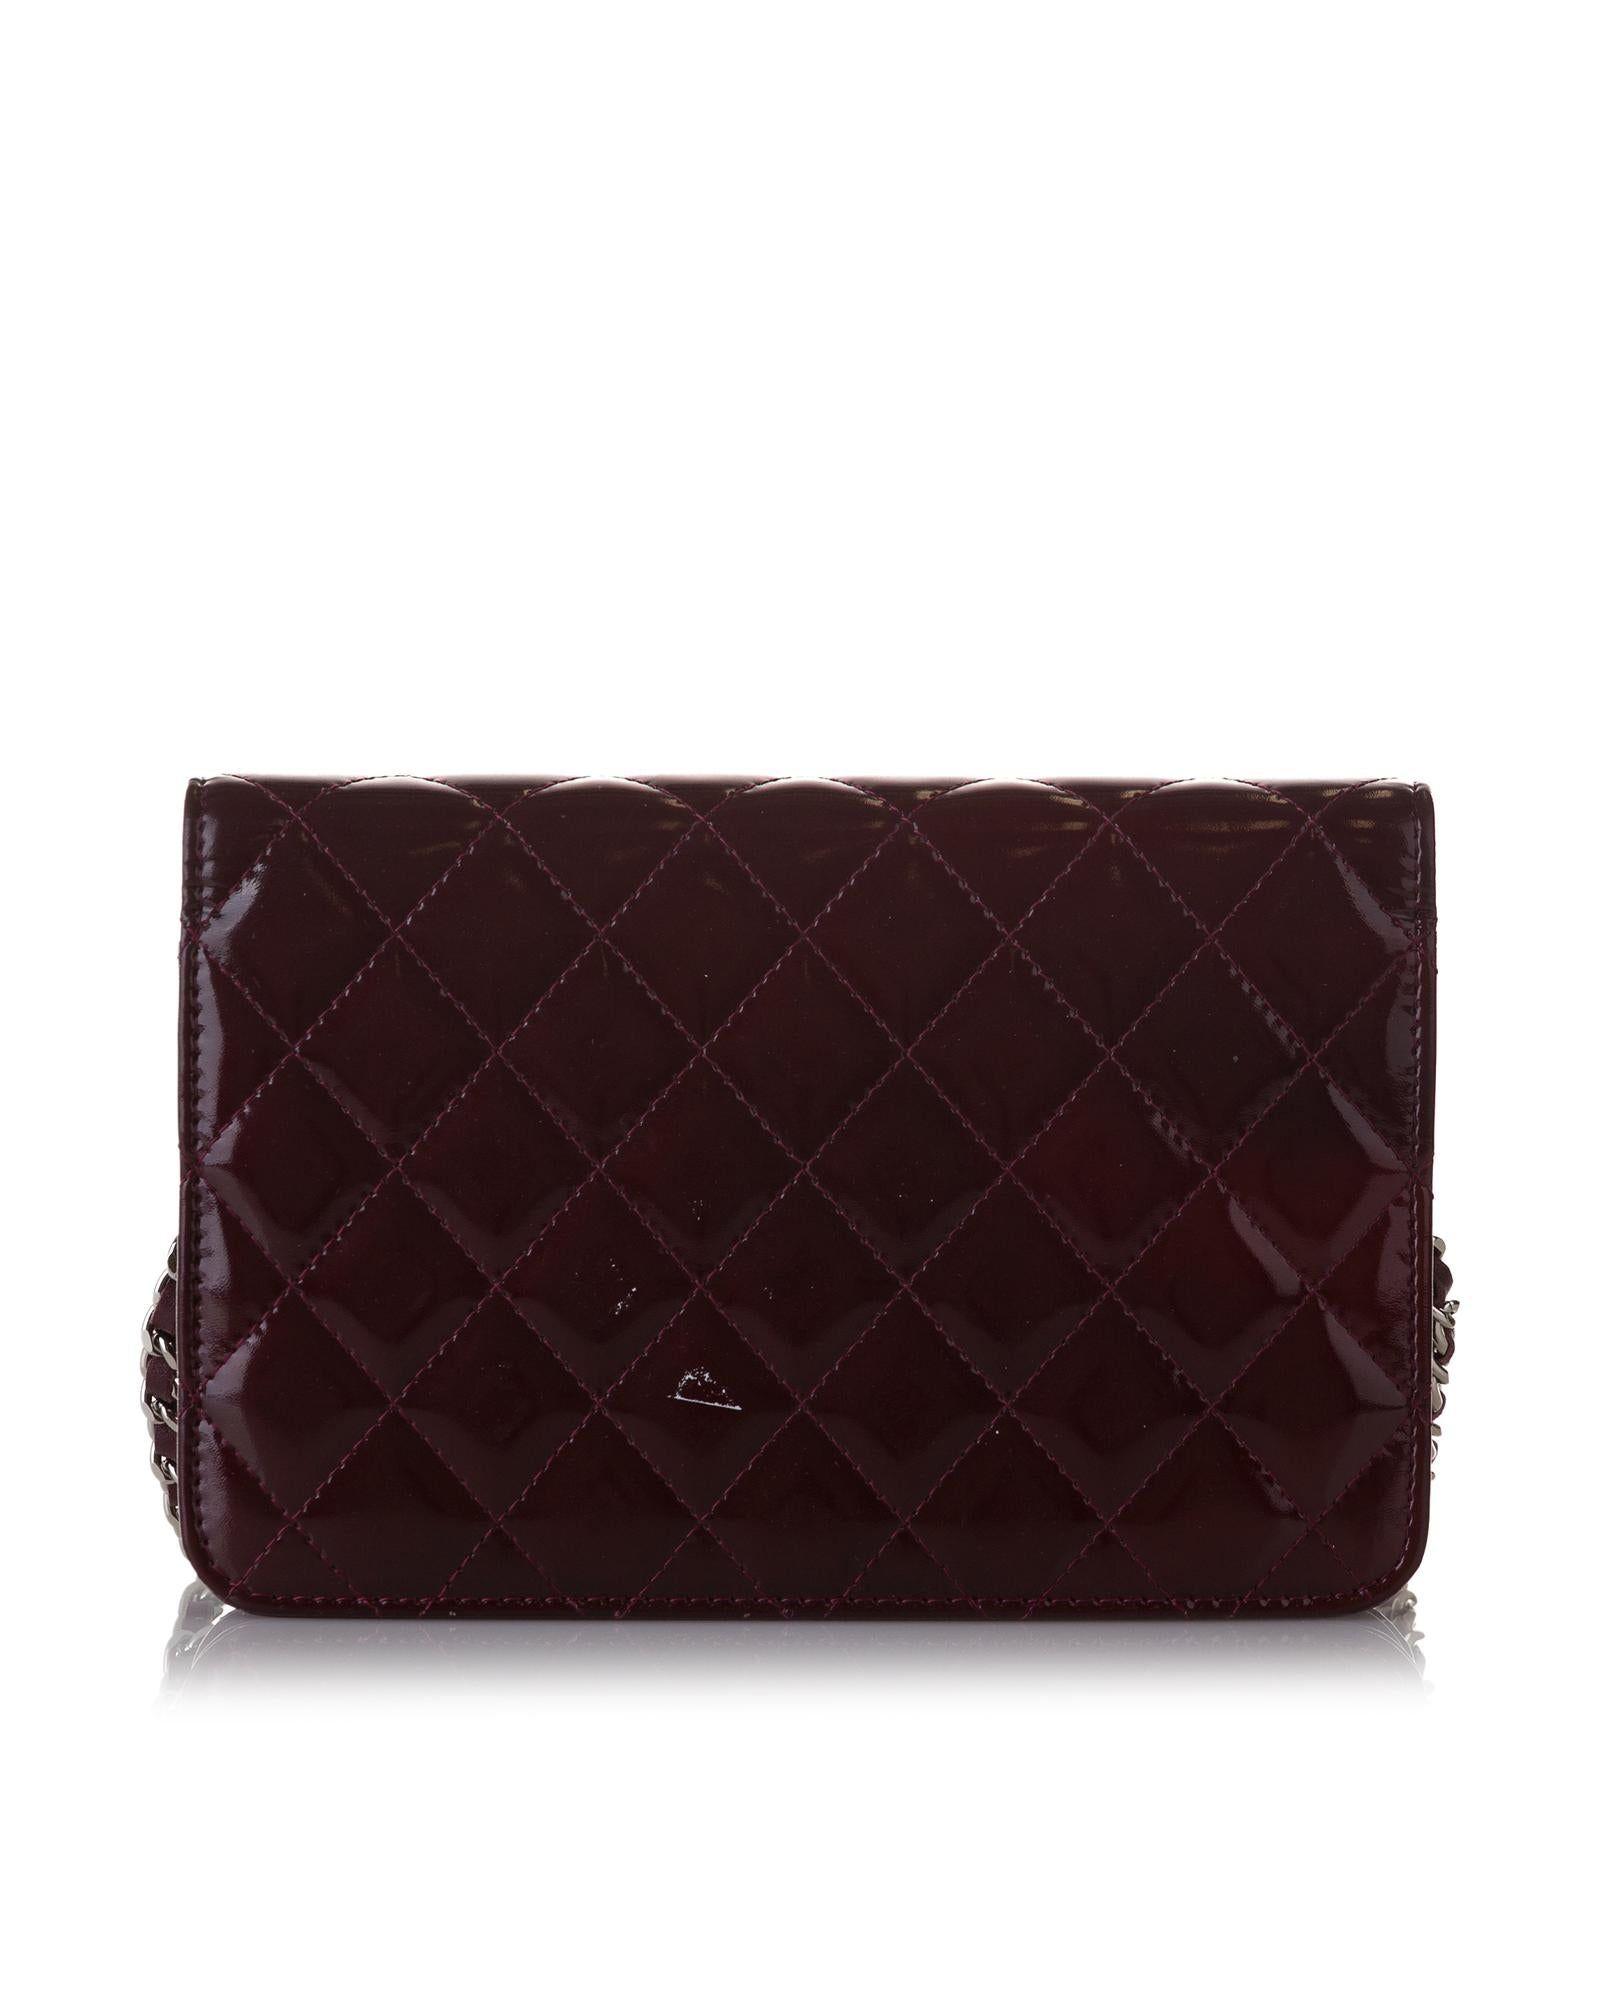 Chanel Quilted Patent Leather Flap Wallet With Chain Strap in Purple